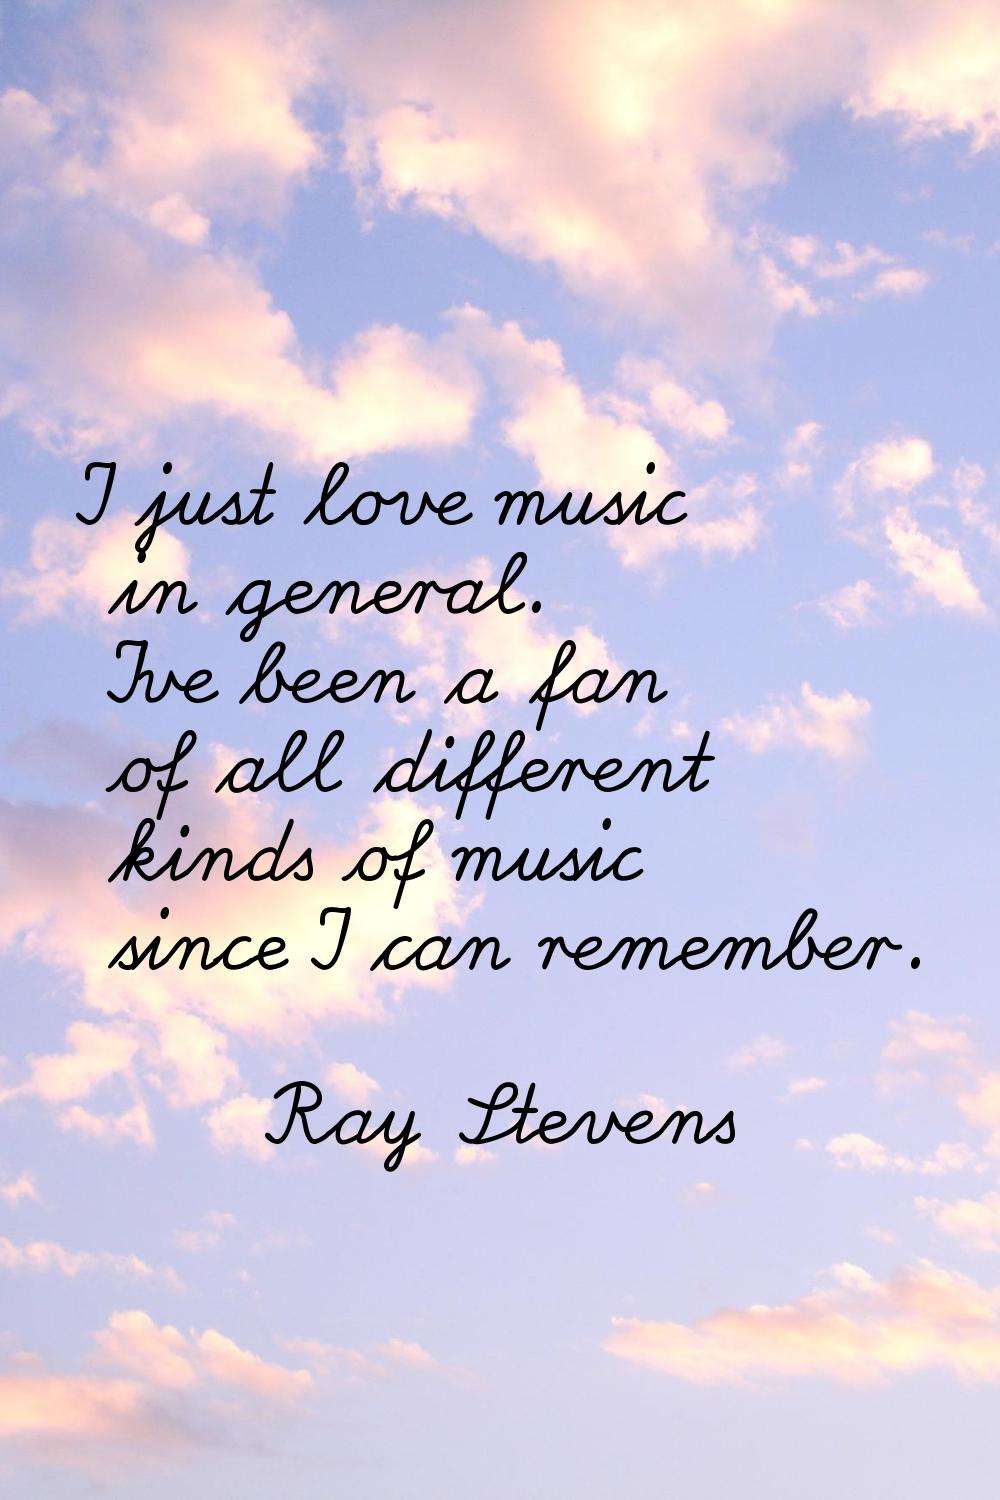 I just love music in general. I've been a fan of all different kinds of music since I can remember.